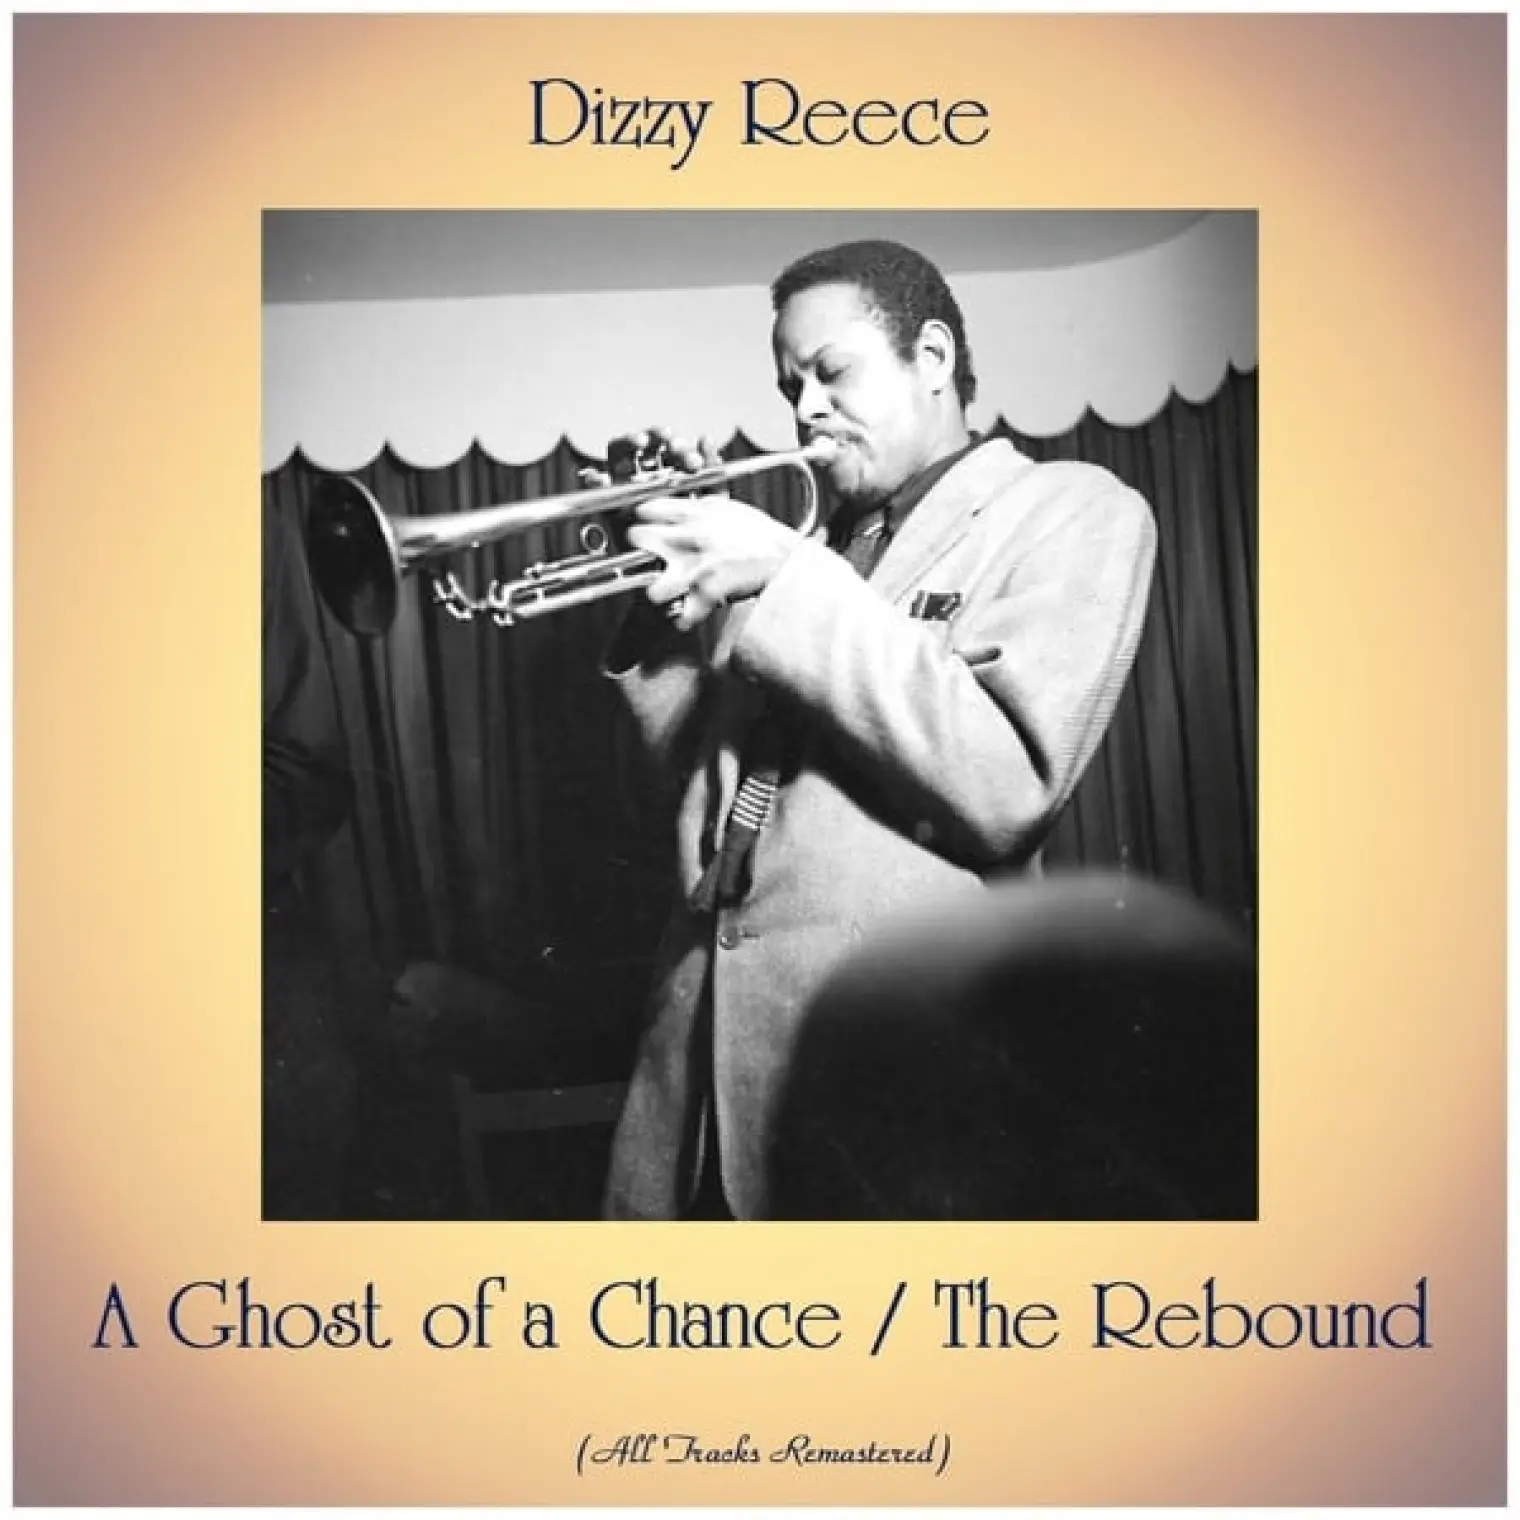 A Ghost of a Chance / The Rebound (All Tracks Remastered) -  Dizzy Reece 